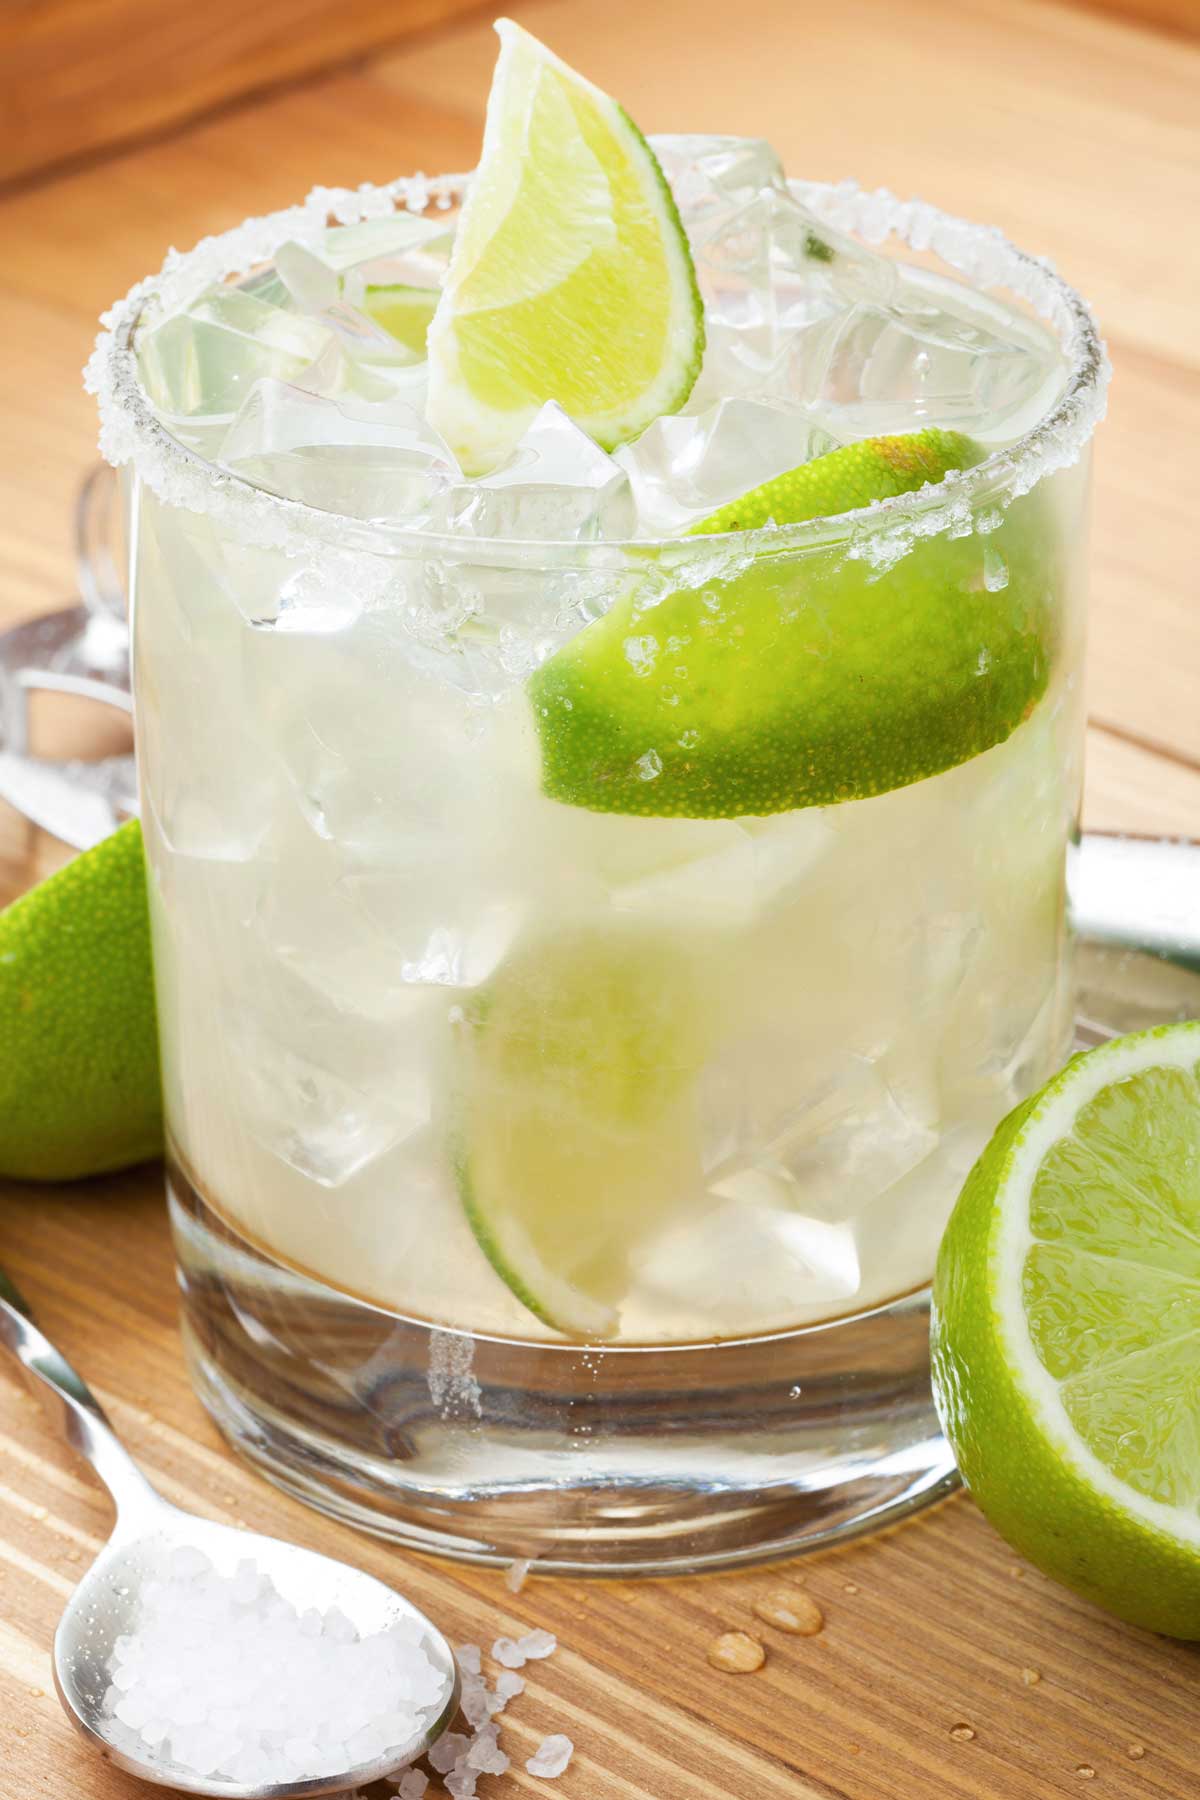 Low-Calorie Tequila: Exploring Tequila Options with the Lowest Caloric Content